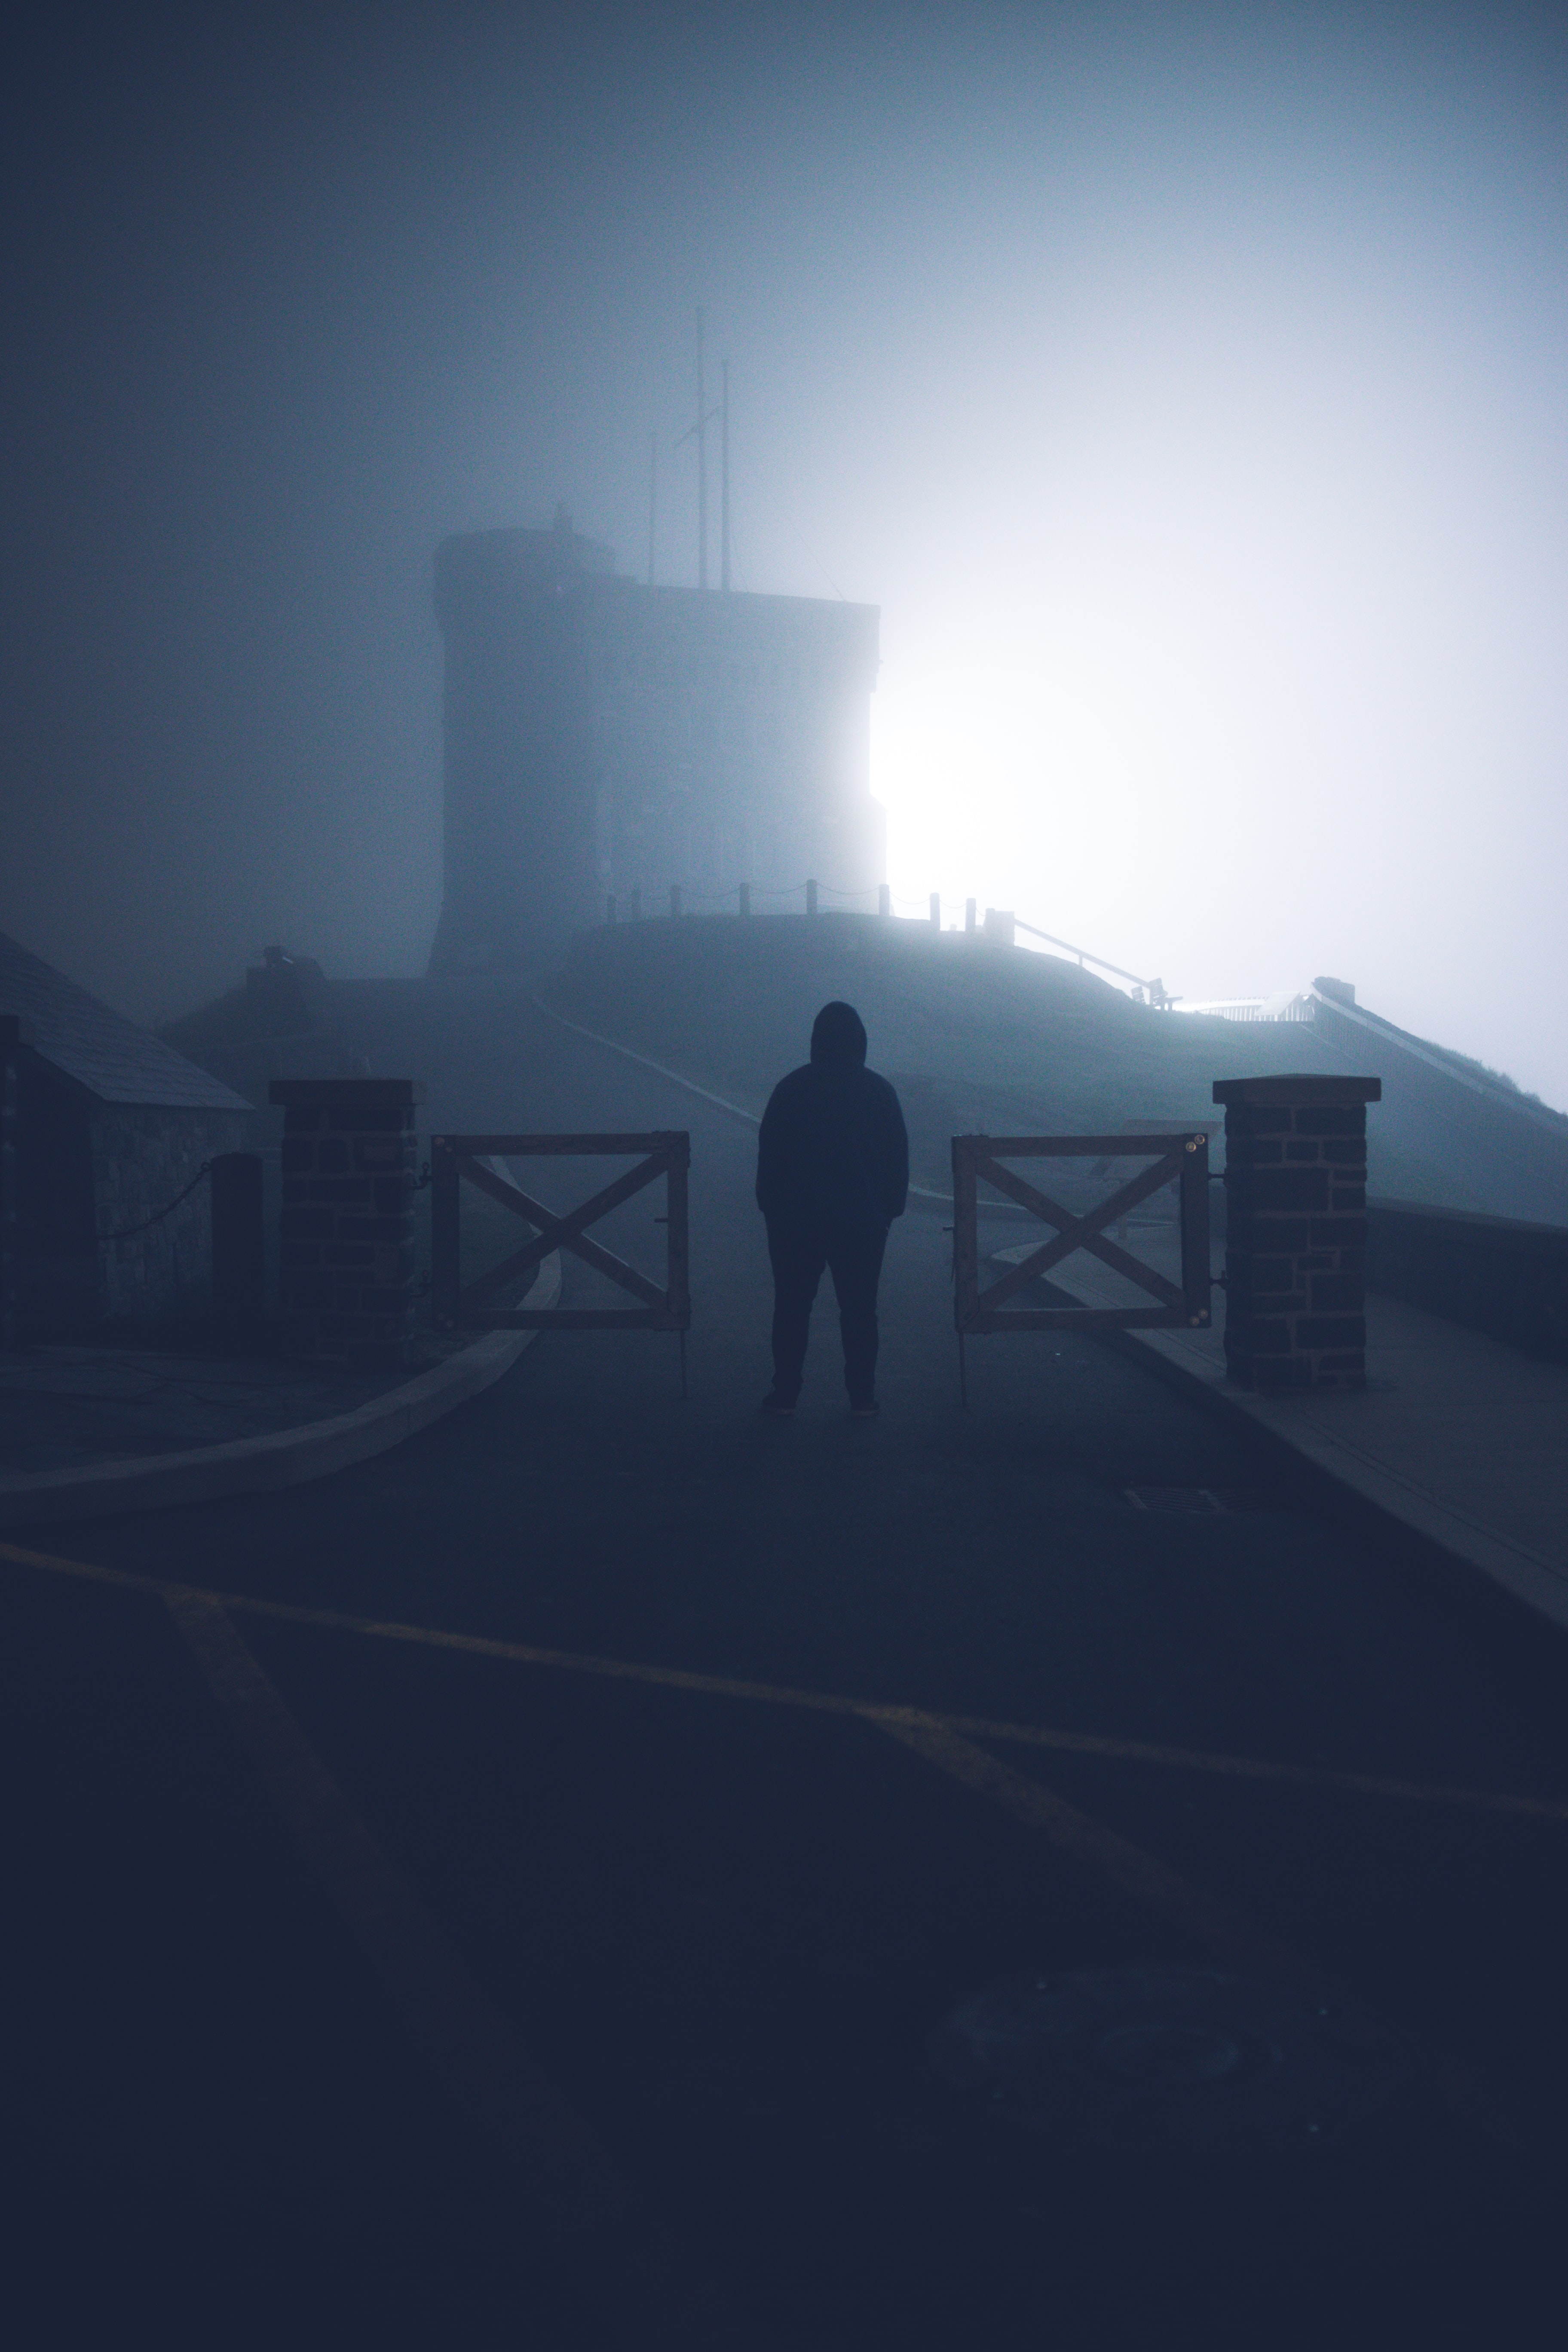 Download background alone, nature, silhouette, fog, sadness, loneliness, lonely, sorrow